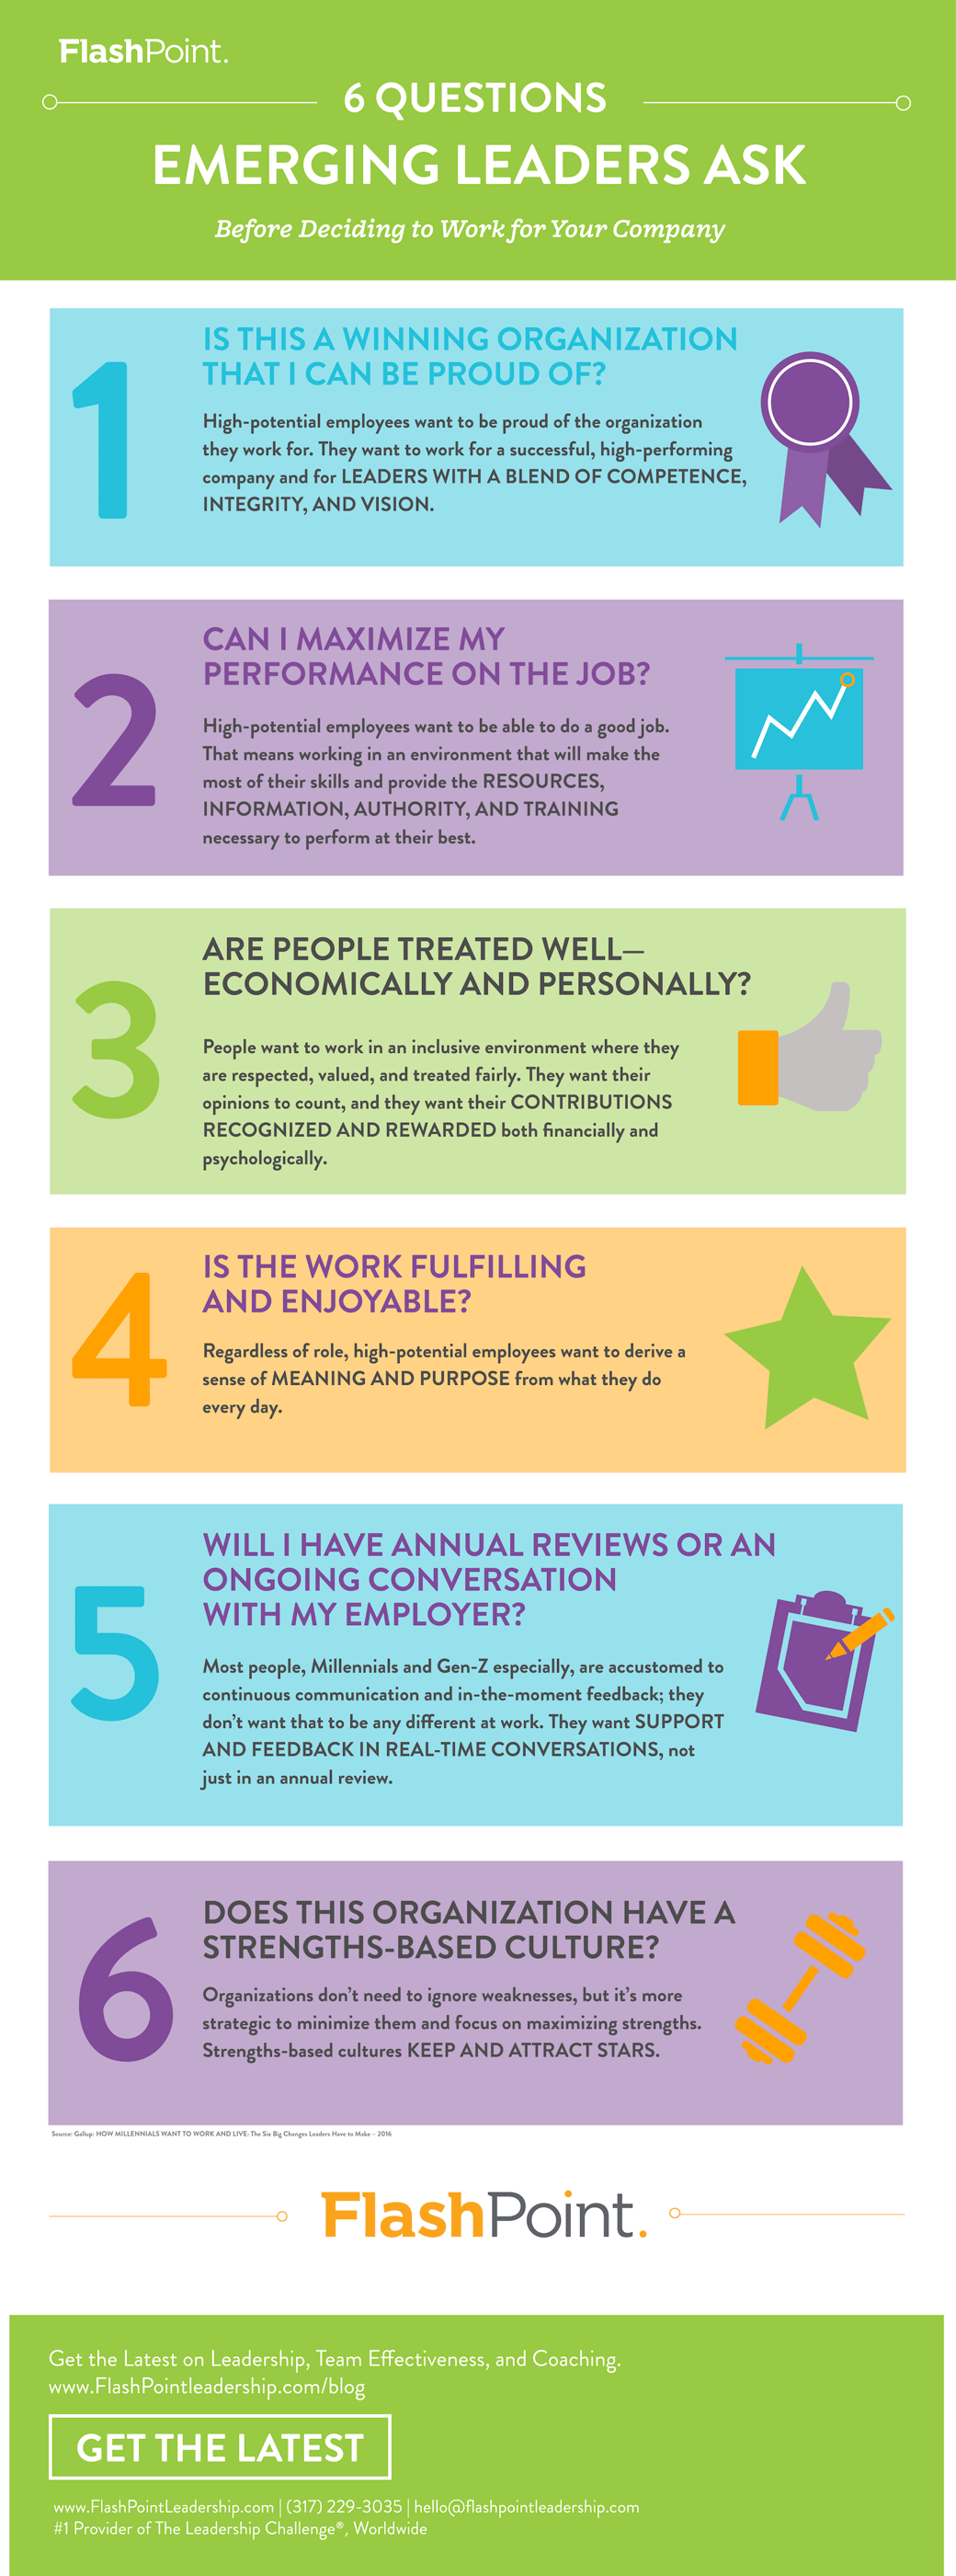 6-Questions-Emerging-Leaders-Ask.png